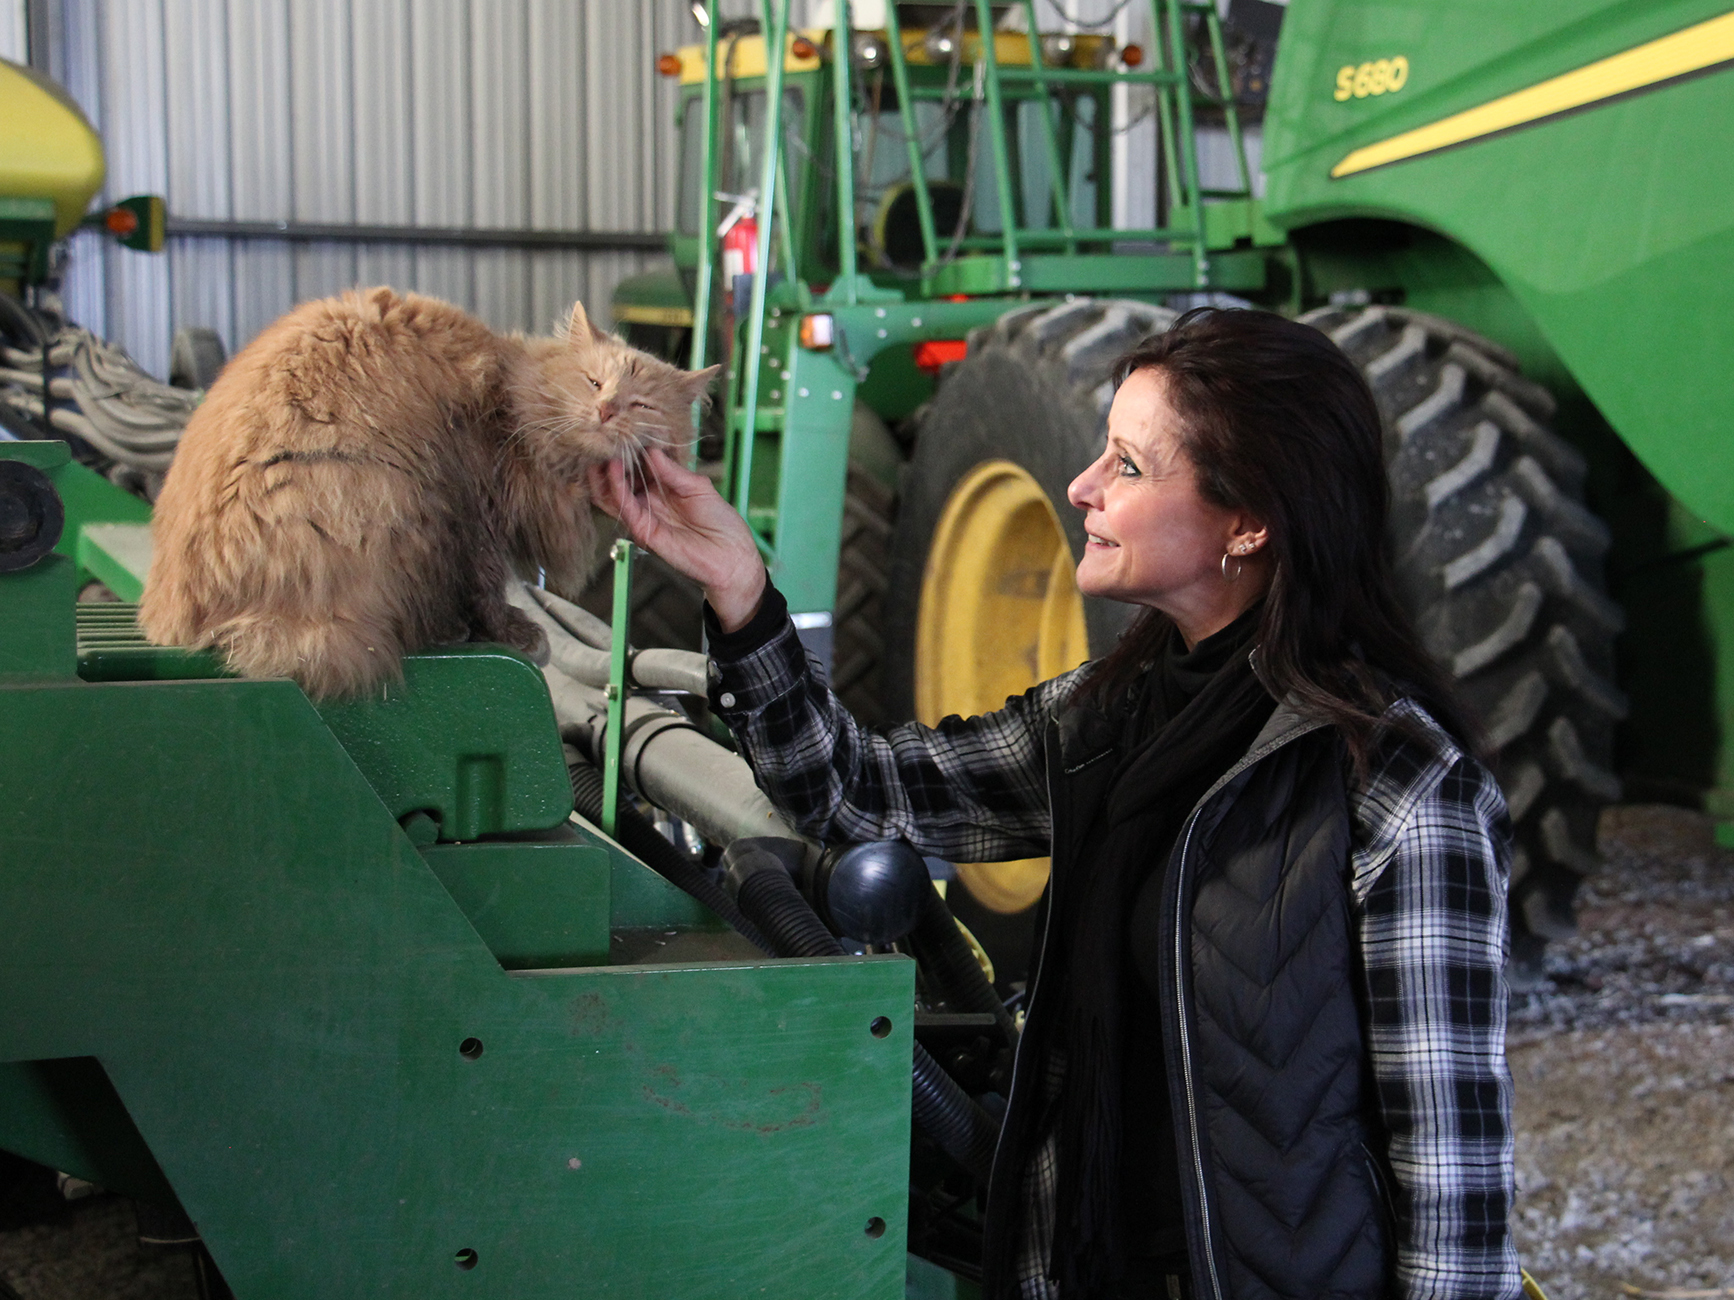 Deb Gangwish with Farley, a cat that once stowed away in a truckload of hay and made it all the way from Nebraska to Illinois and back.